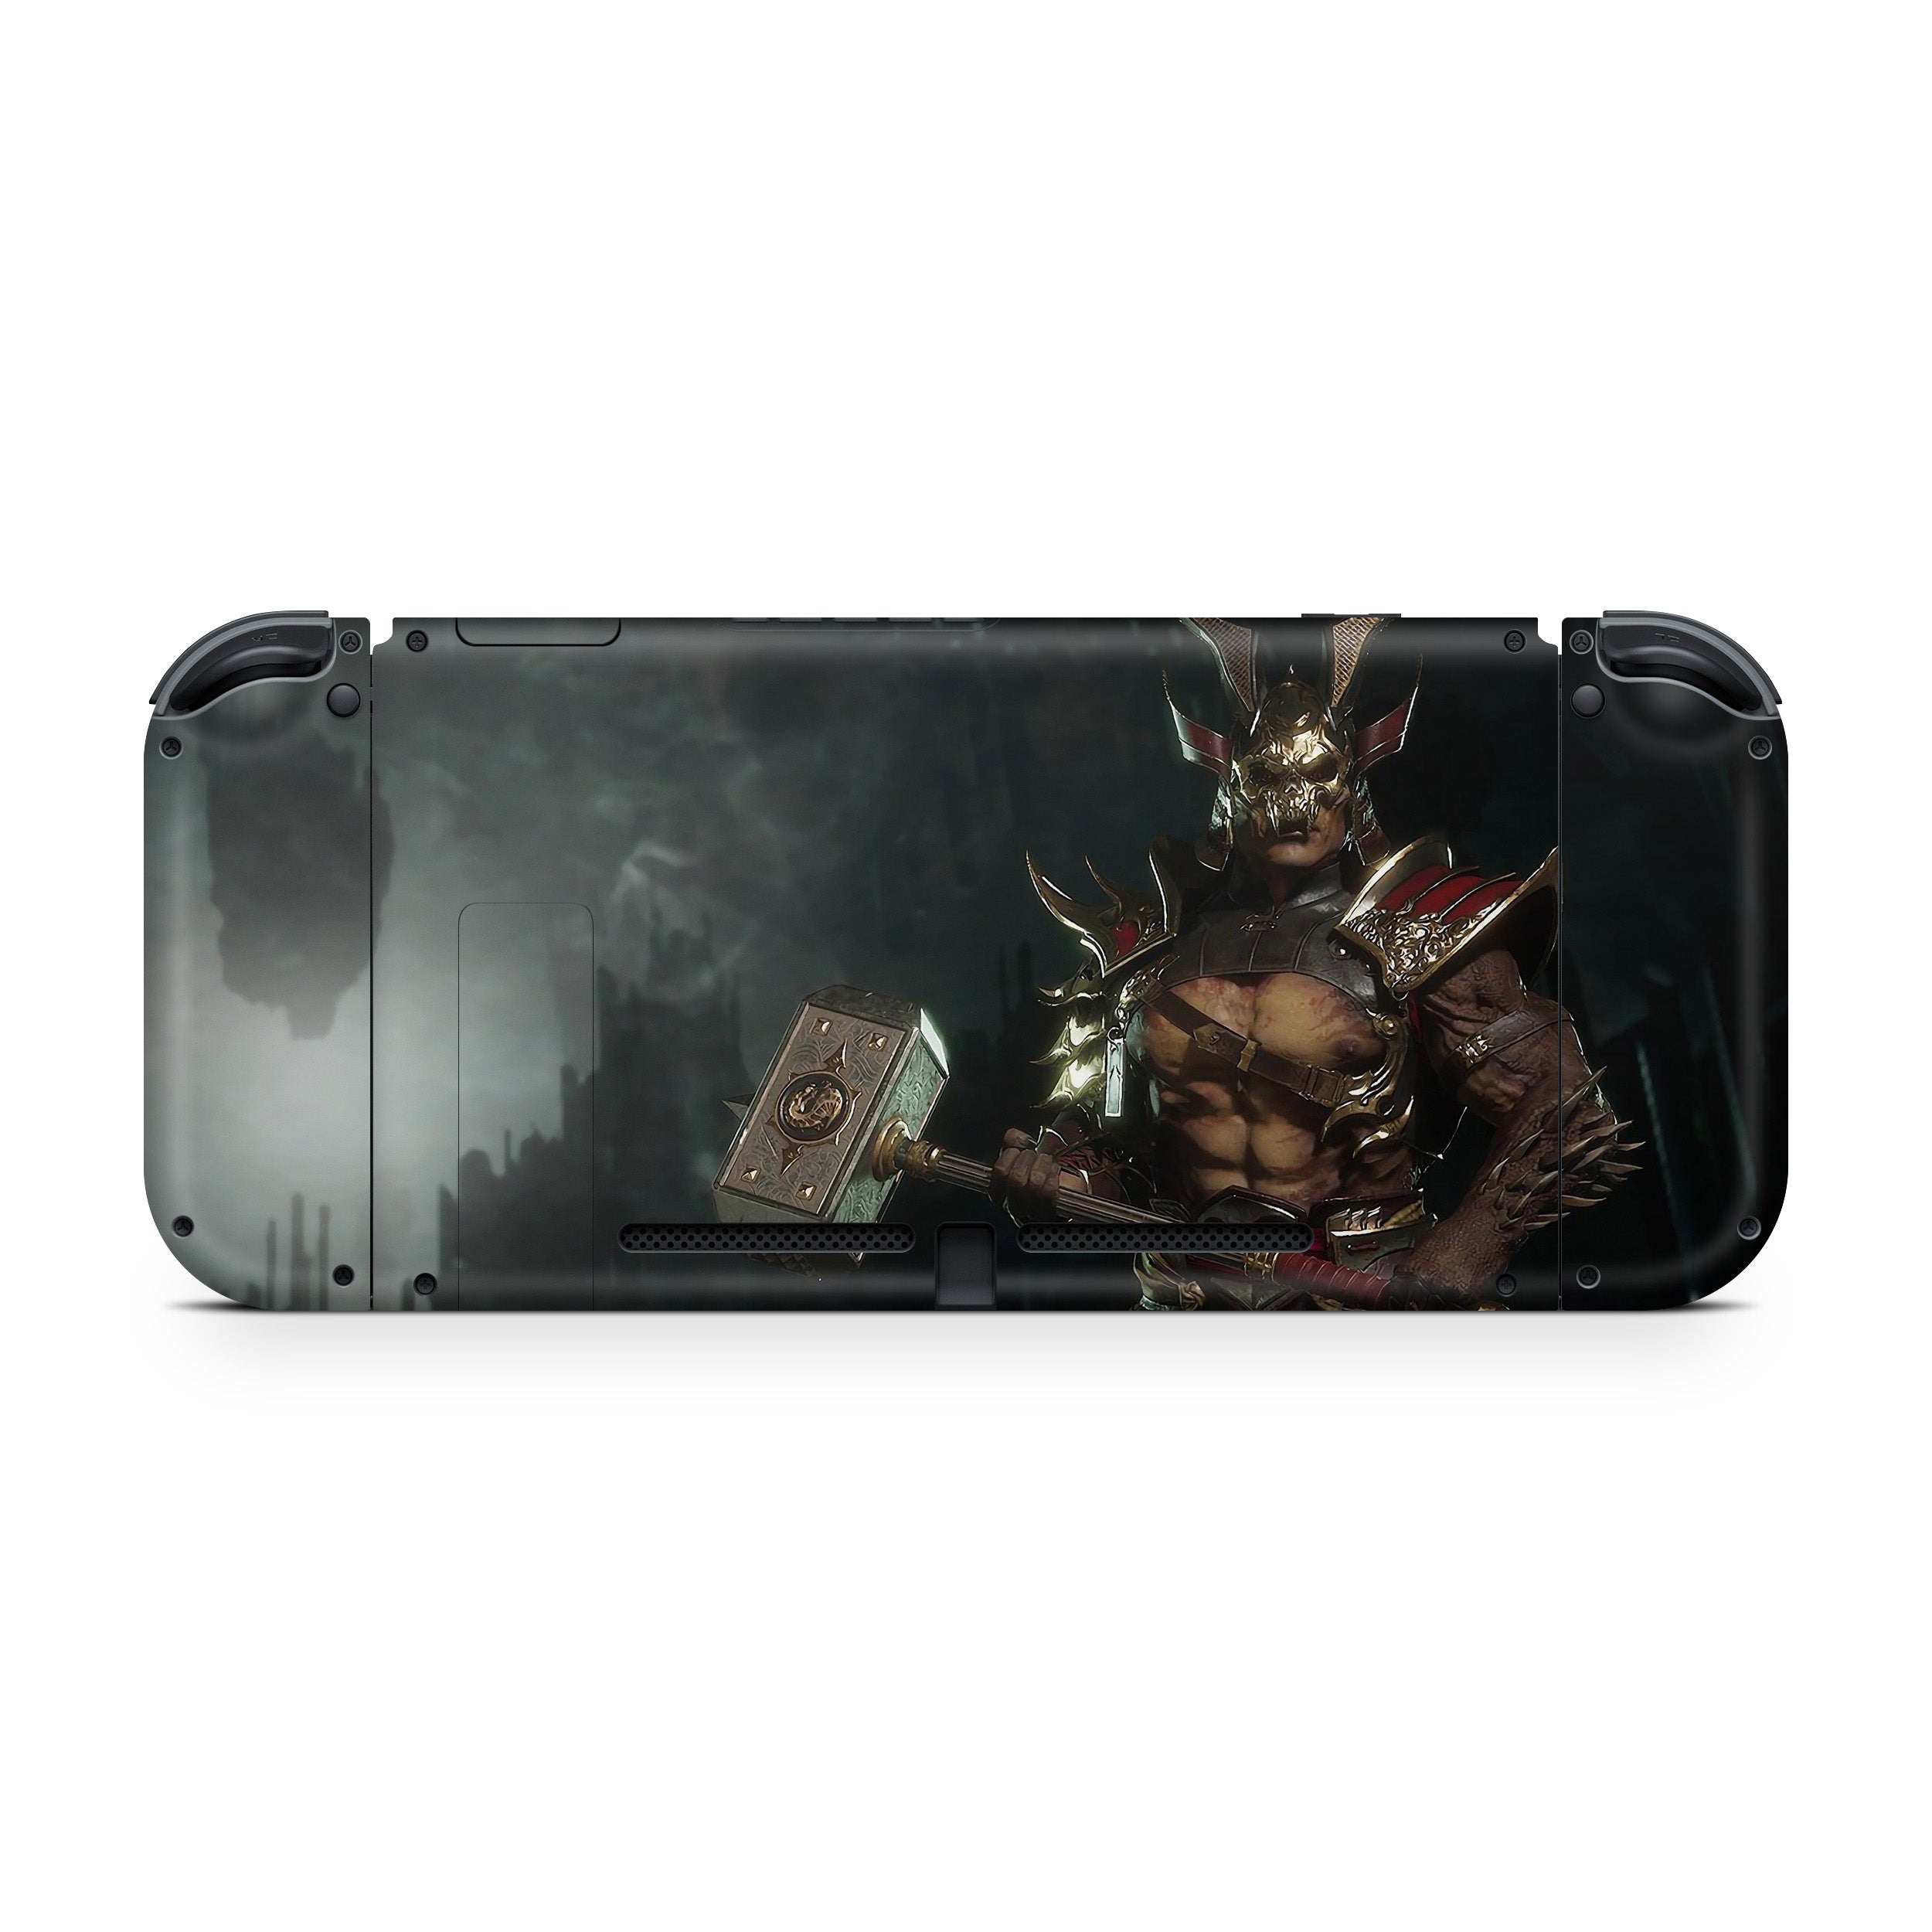 A video game skin featuring a Mortal Kombat 11 Shao Kahn design for the Nintendo Switch.